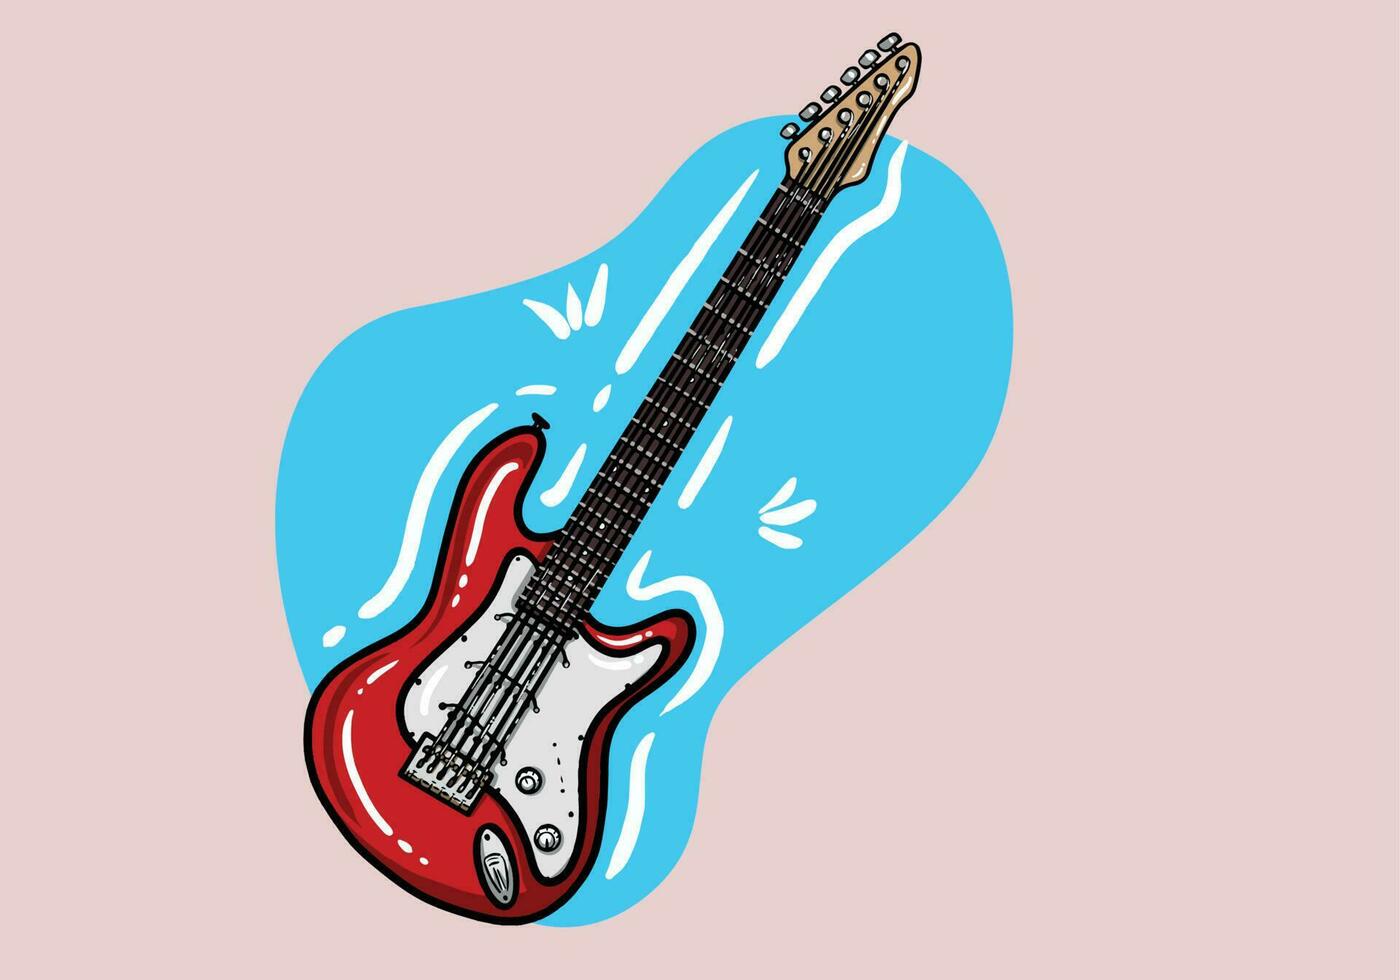 Rock music instrument. Cool red electro guitar cartoon style. Colored flat vector illustration isolated on background